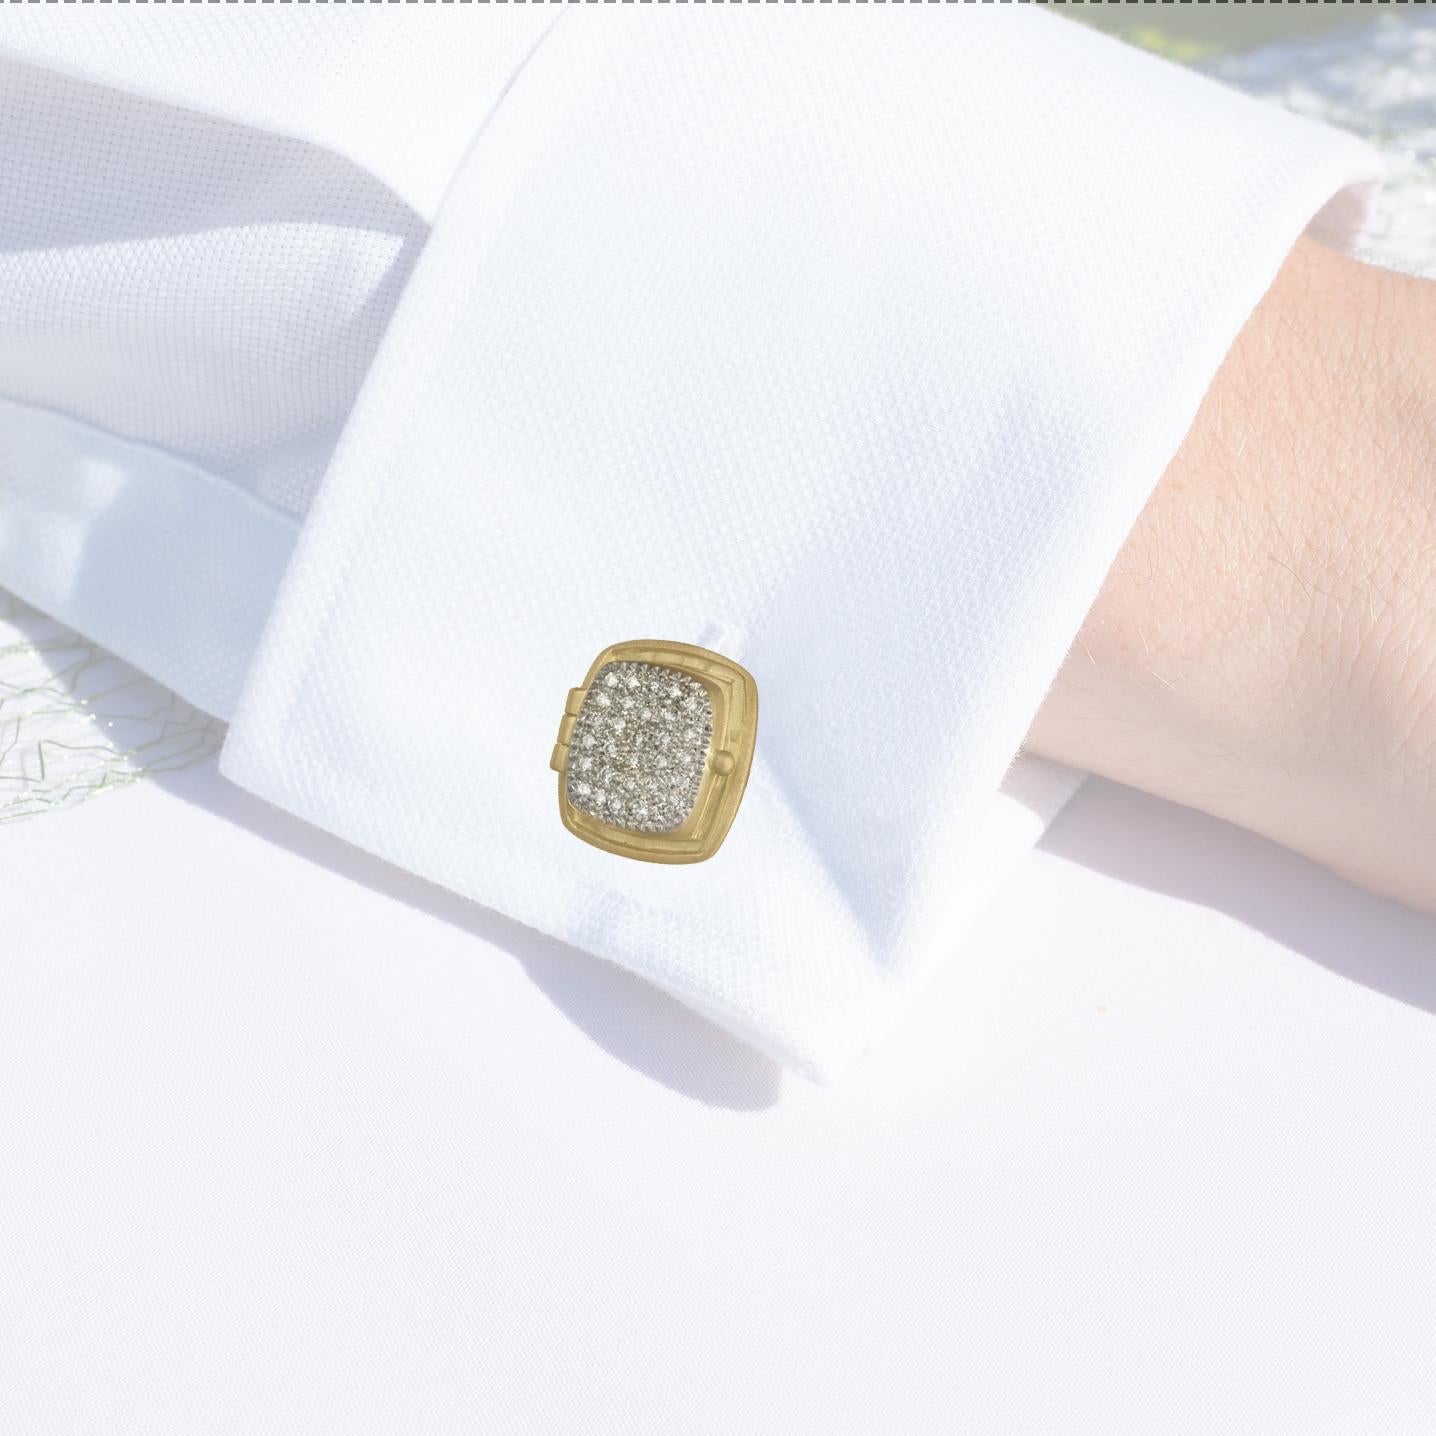 These cufflinks were inspired by the 16th-century noblewoman and queen consort Catherine de Medici. Tradition has it that she was a notorious poisoner and kept her vices inside locket-style rings. Wendy suggests you use the secret compartments in